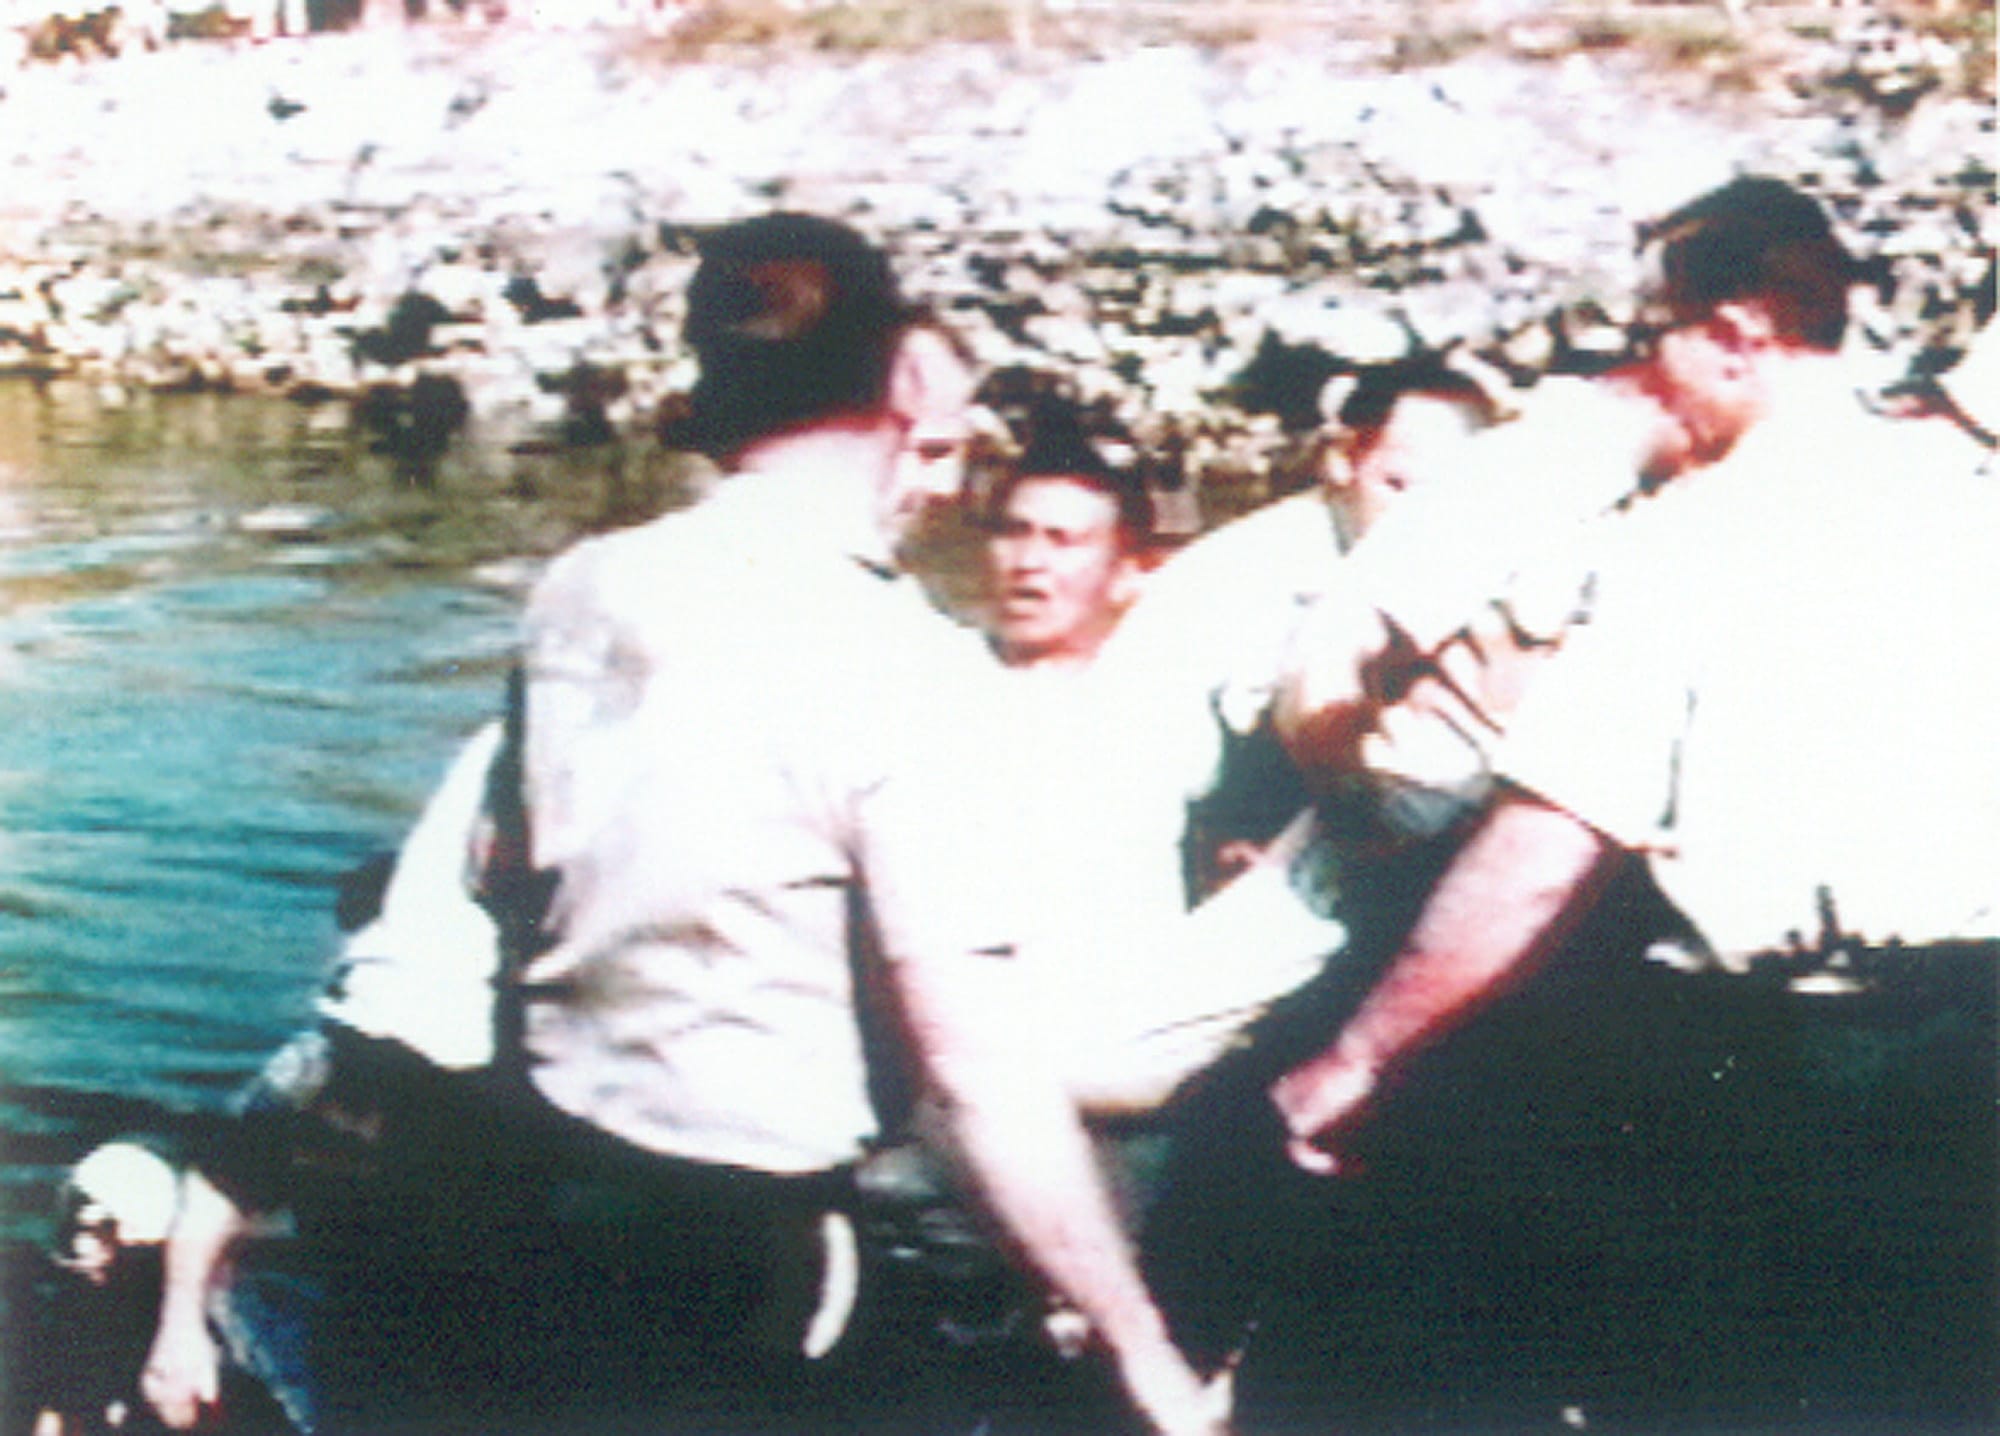 In this photo from the late 1960s provided by the Northwest Indian Fisheries Commission, Billy Frank, center, is arrested during a &quot;fish-in&quot; staged near the Washington State Capitol in Olympia.